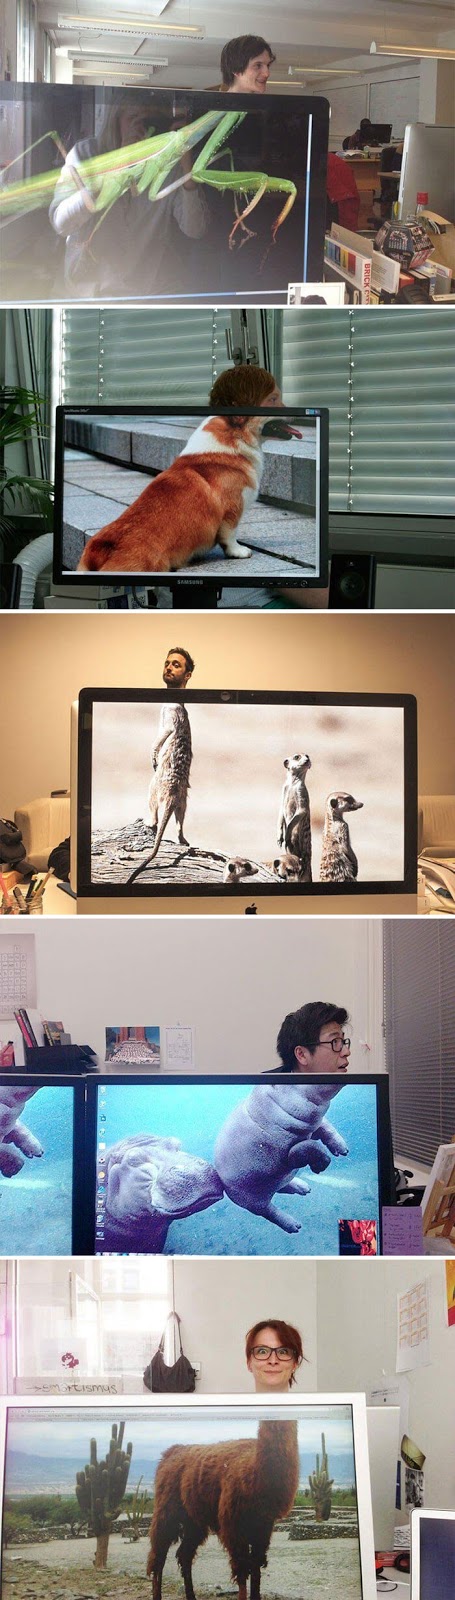 28 Creatively Hilarious Desktop Wallpapers We Wished We Had Thought Of First - Coworkers Adding Heads To Animals On Desktop Background